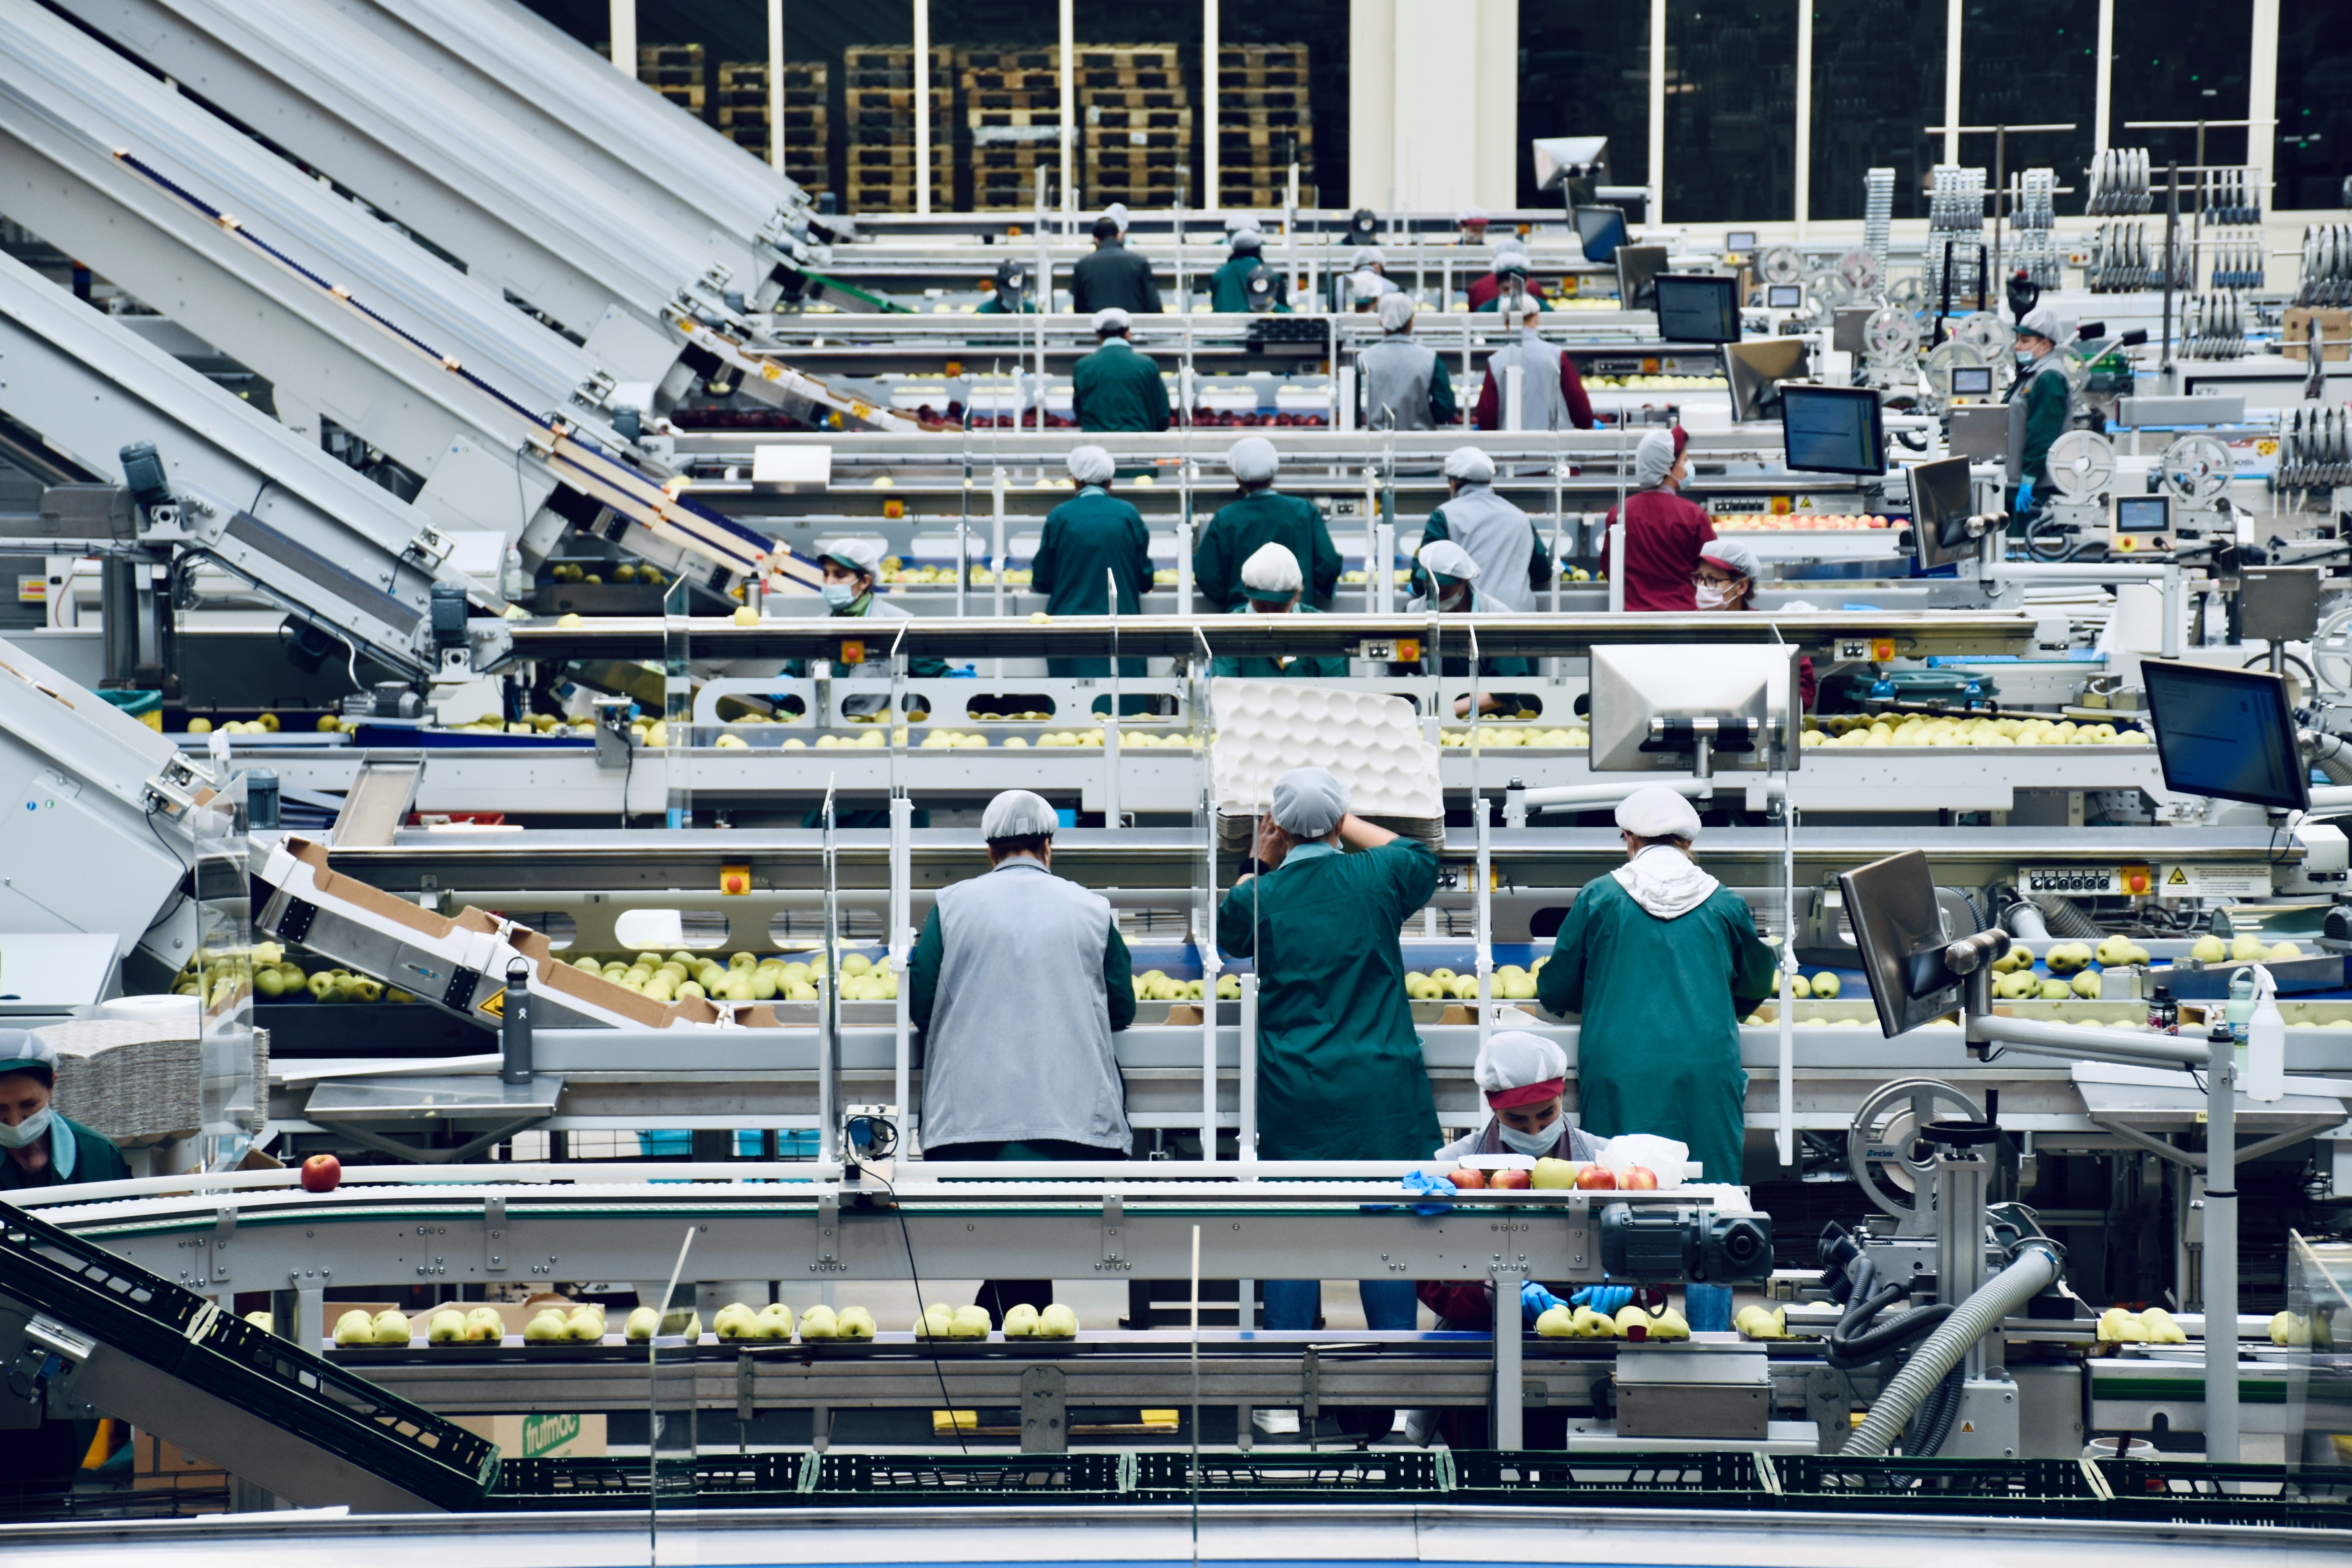 An image of a food production center — a team of people sorting apples on a conveyor belt